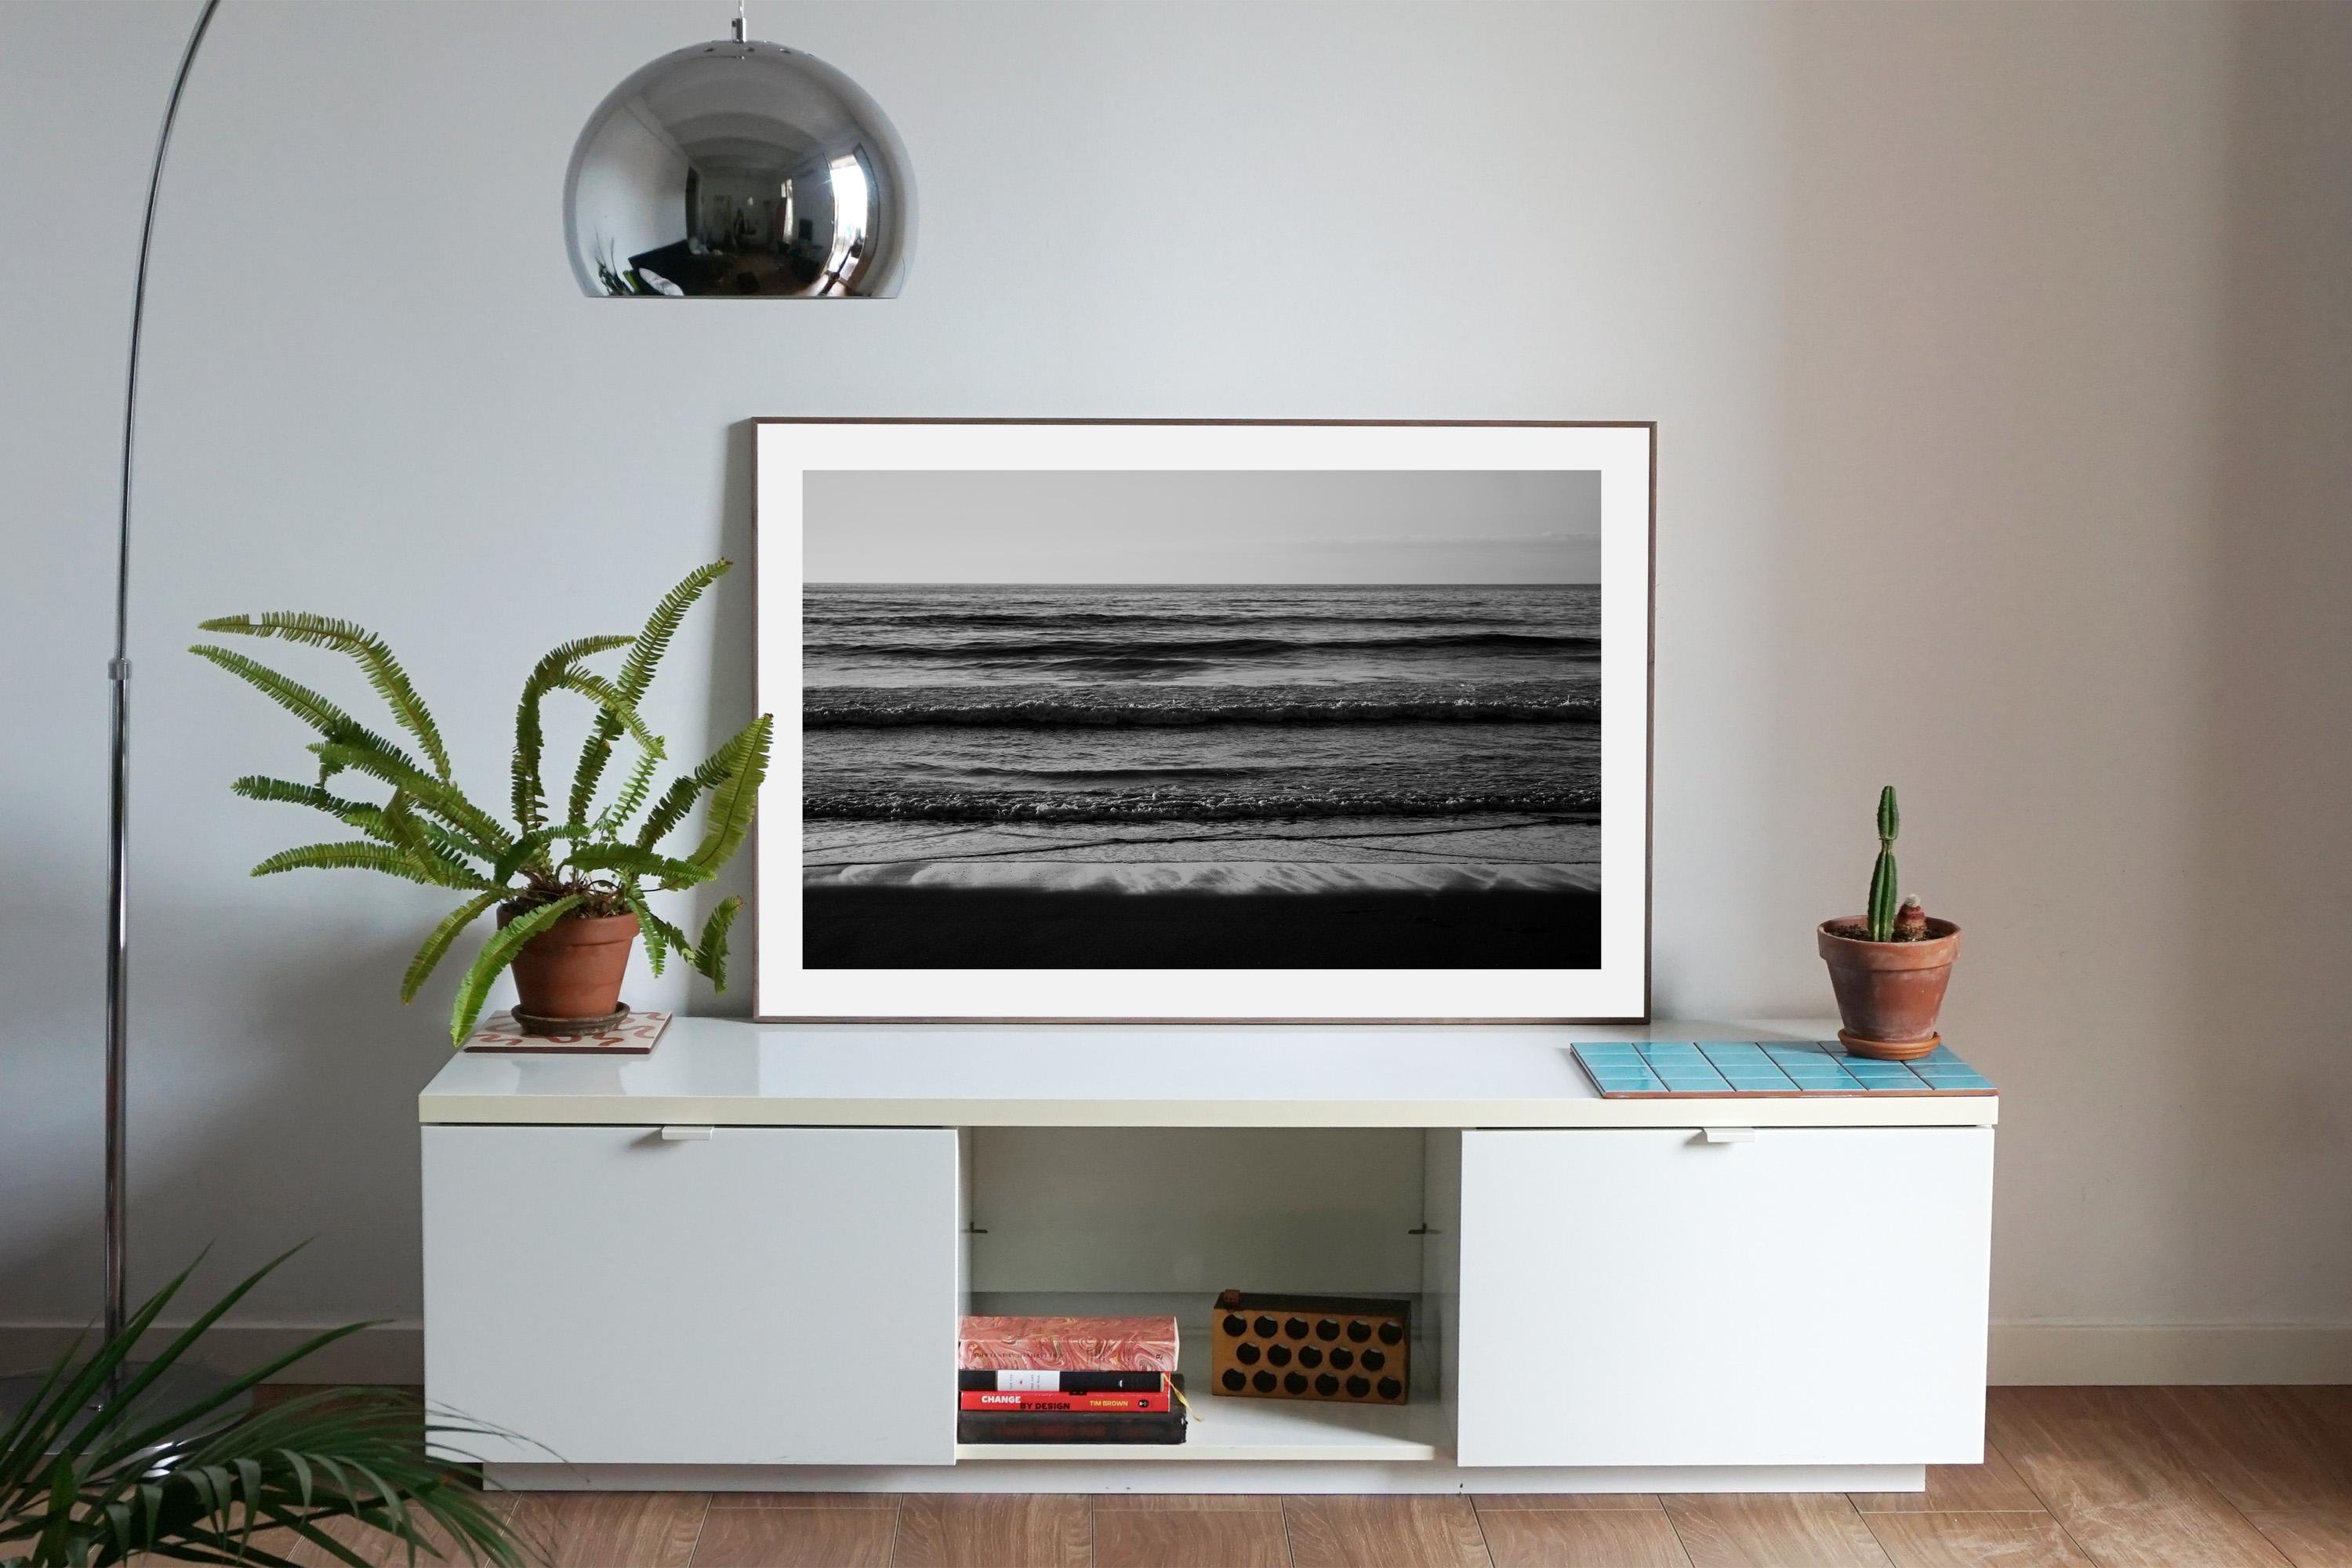 Pacific Beach Horizon, Sunset Seashore in Black and White, Sugimoto Style Giclée - Photorealist Photograph by Kind of Cyan